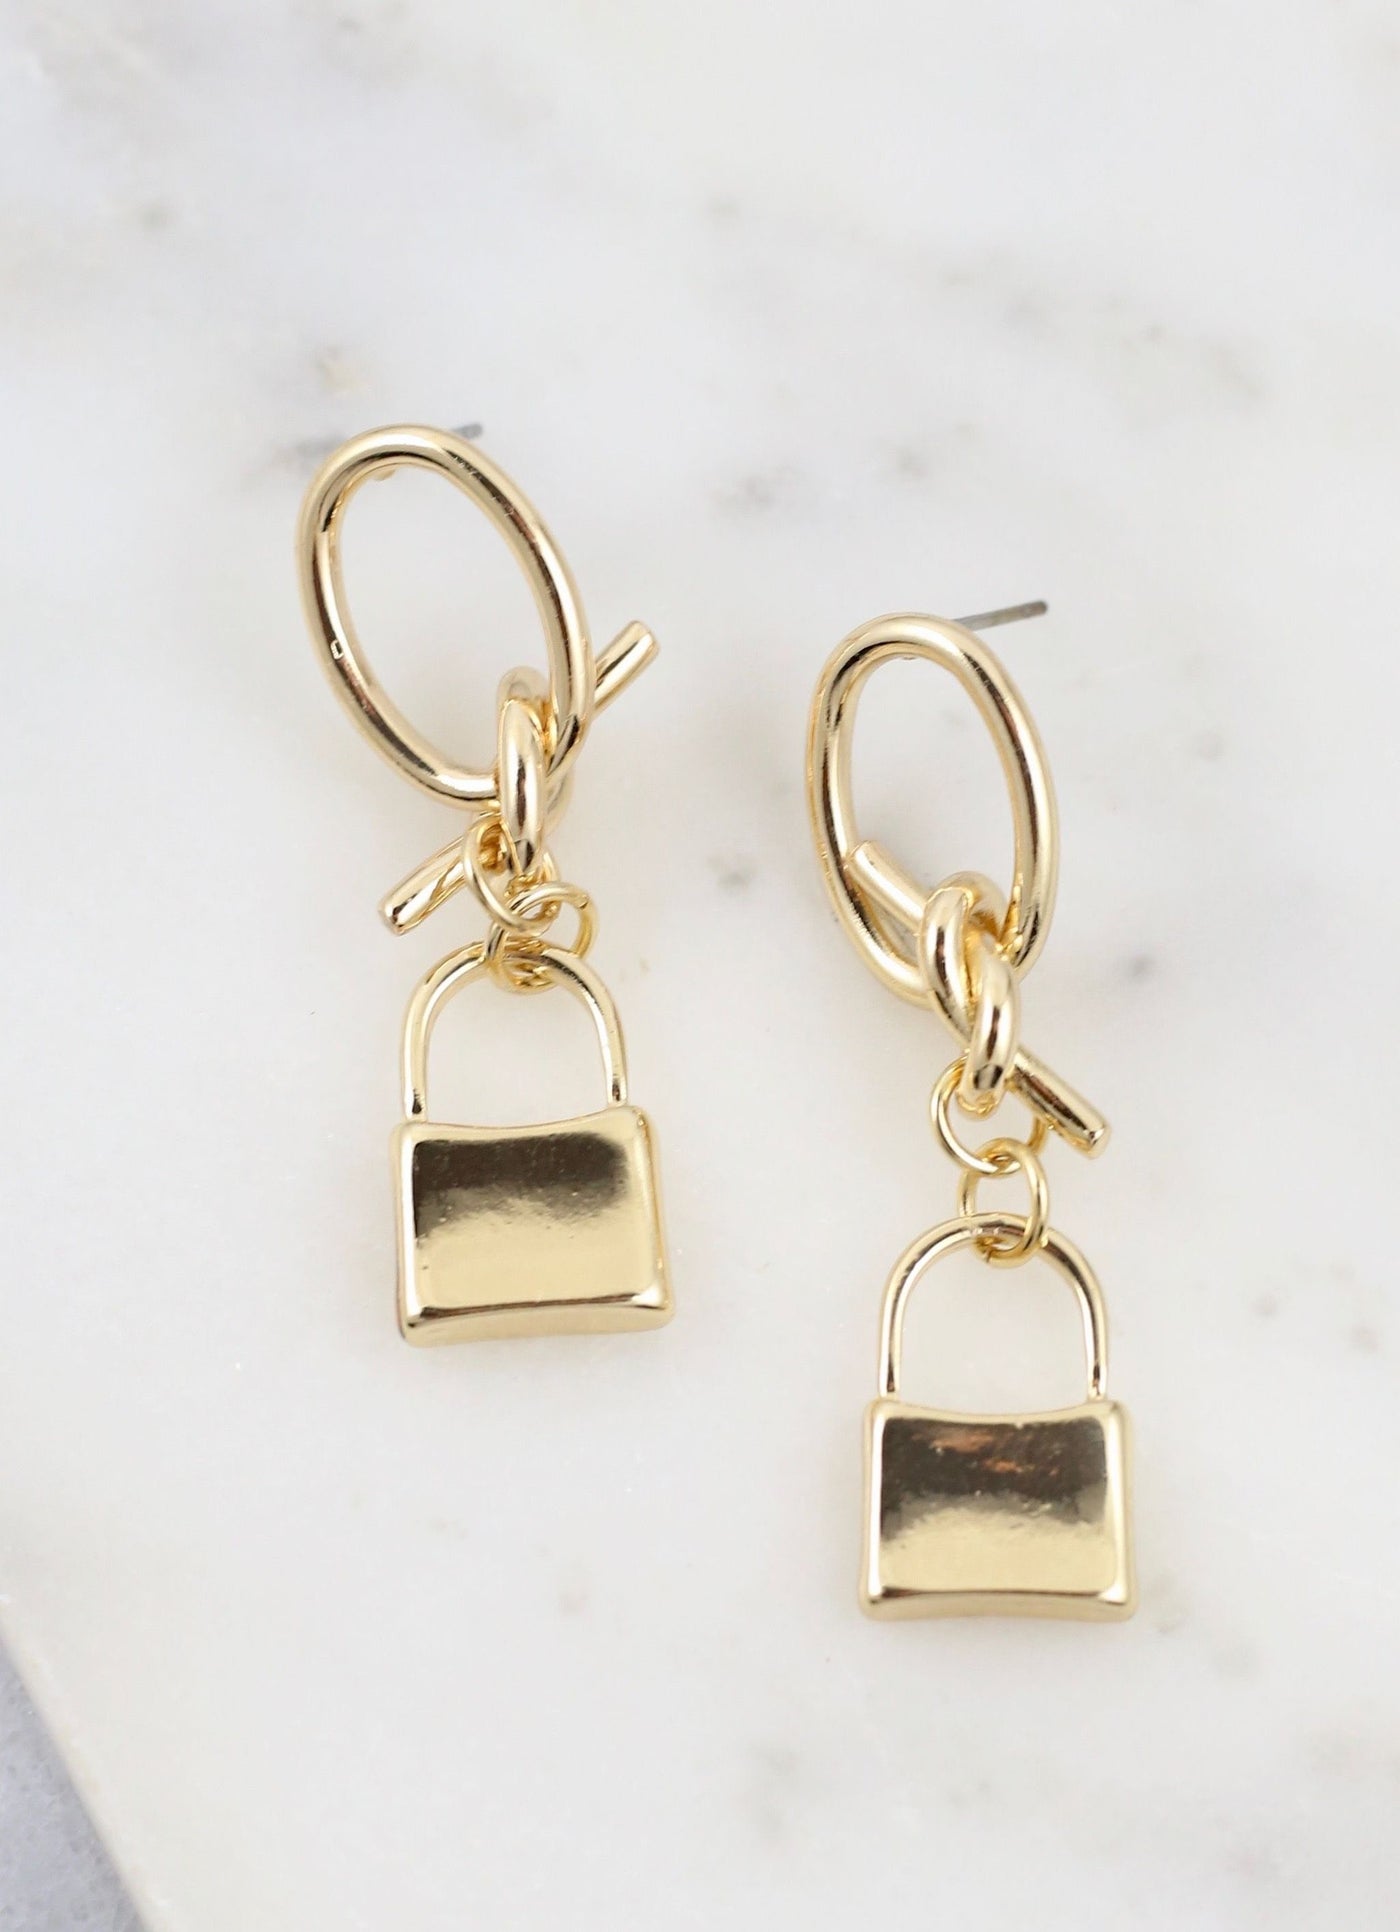 Humel Lock Knot Drop Earrings - Corinne an Affordable Women's Clothing Boutique in the US USA